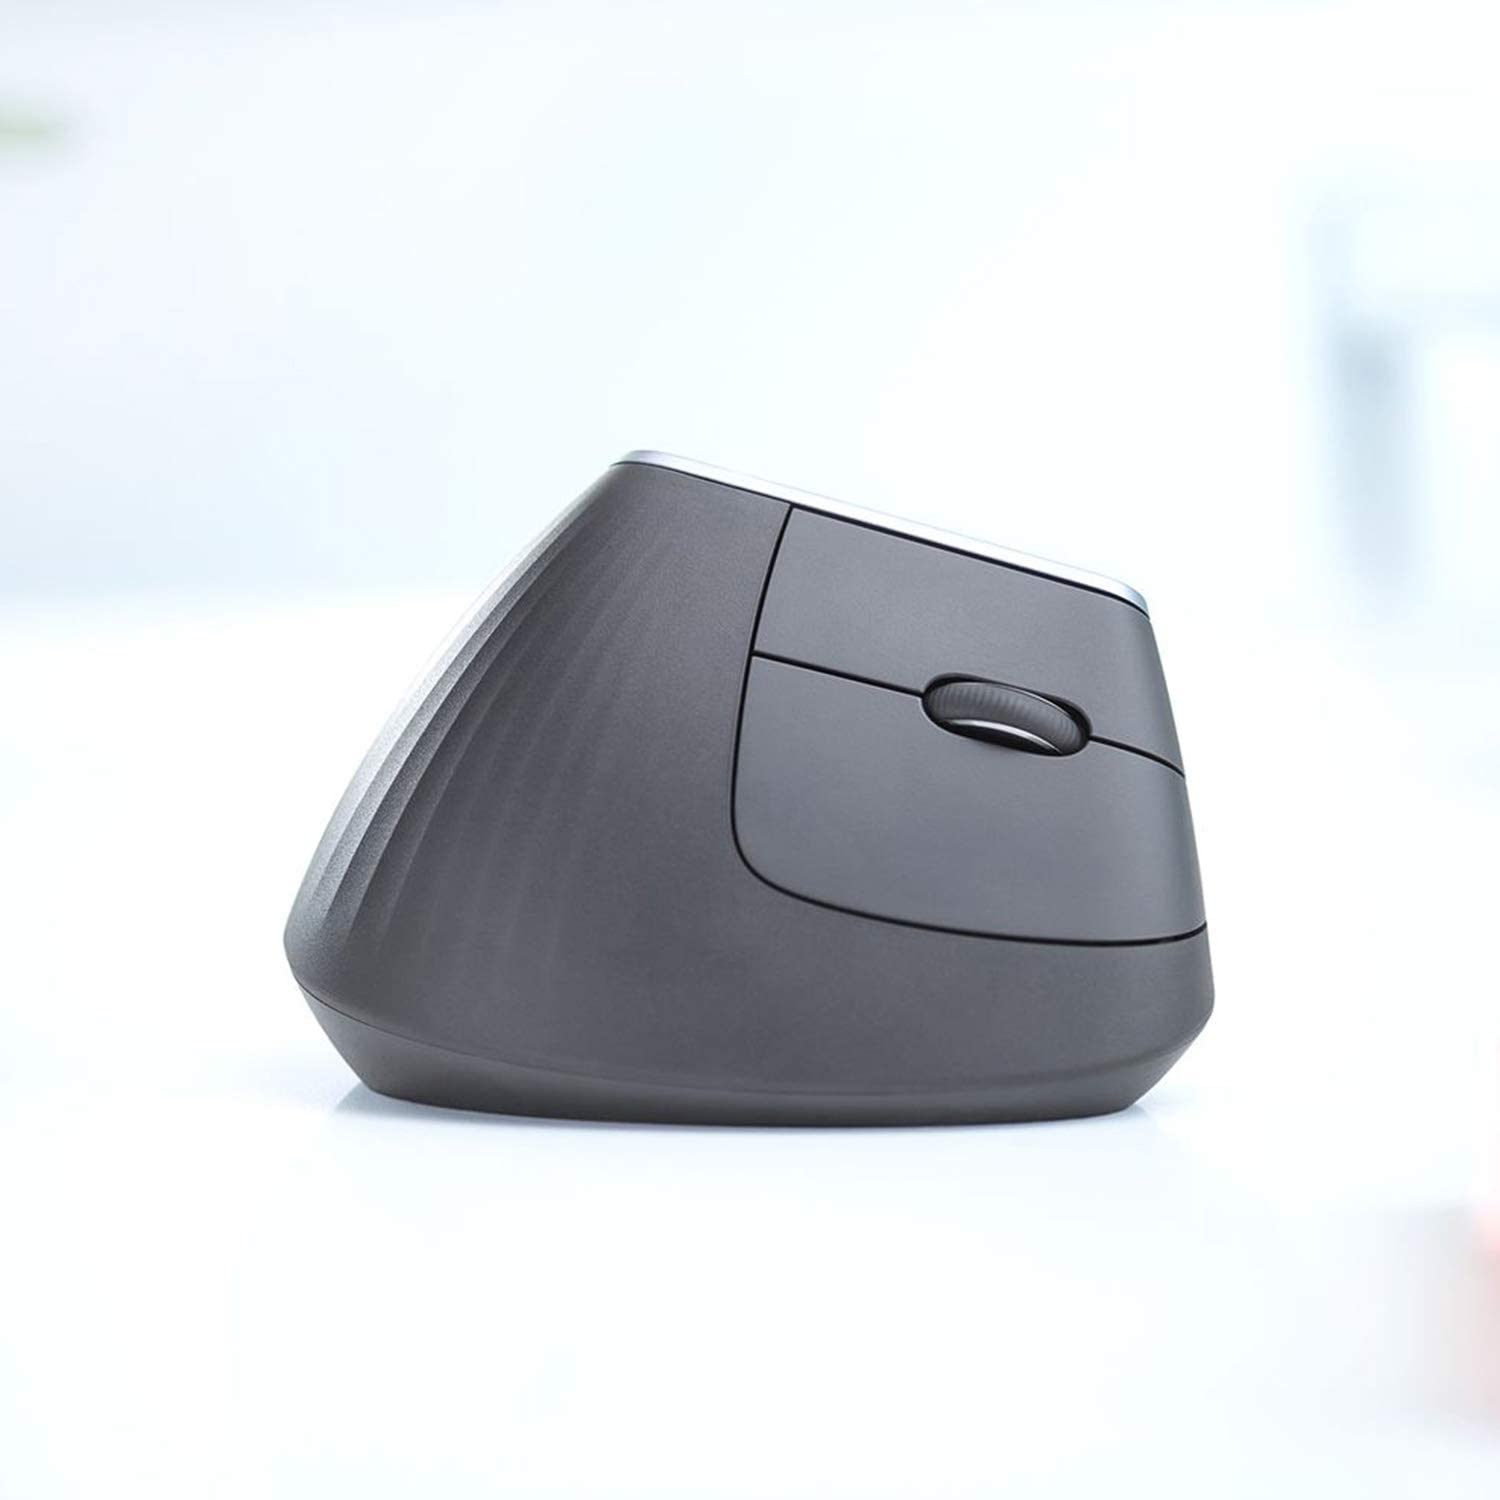 Logitech MX Vertical Wireless Mouse – Advanced Ergonomic Design Reduces Muscle Strain, Control and Move Content Between 3 Windows and Apple Computers (Bluetooth or USB), Rechargeable, Graphite